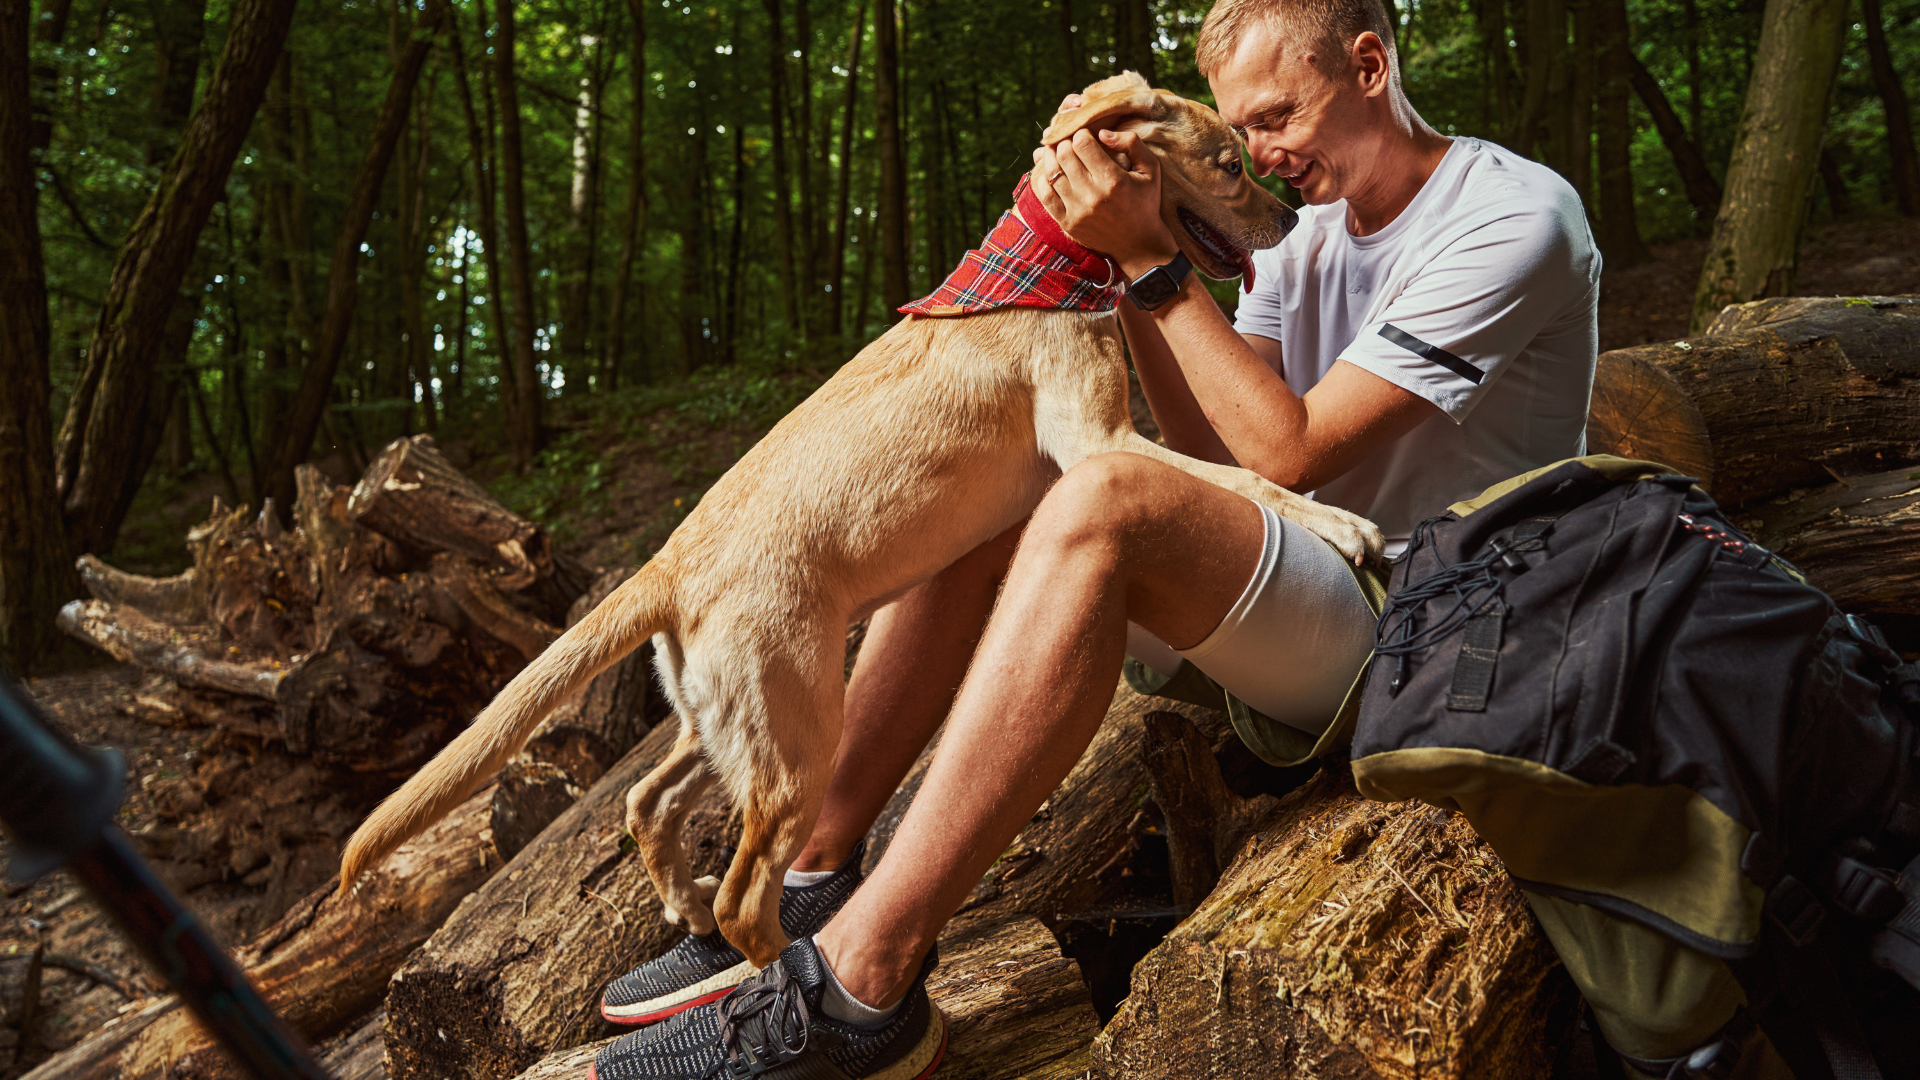 Nutrition and Hydration Tips for Long Hikes with Your Dog